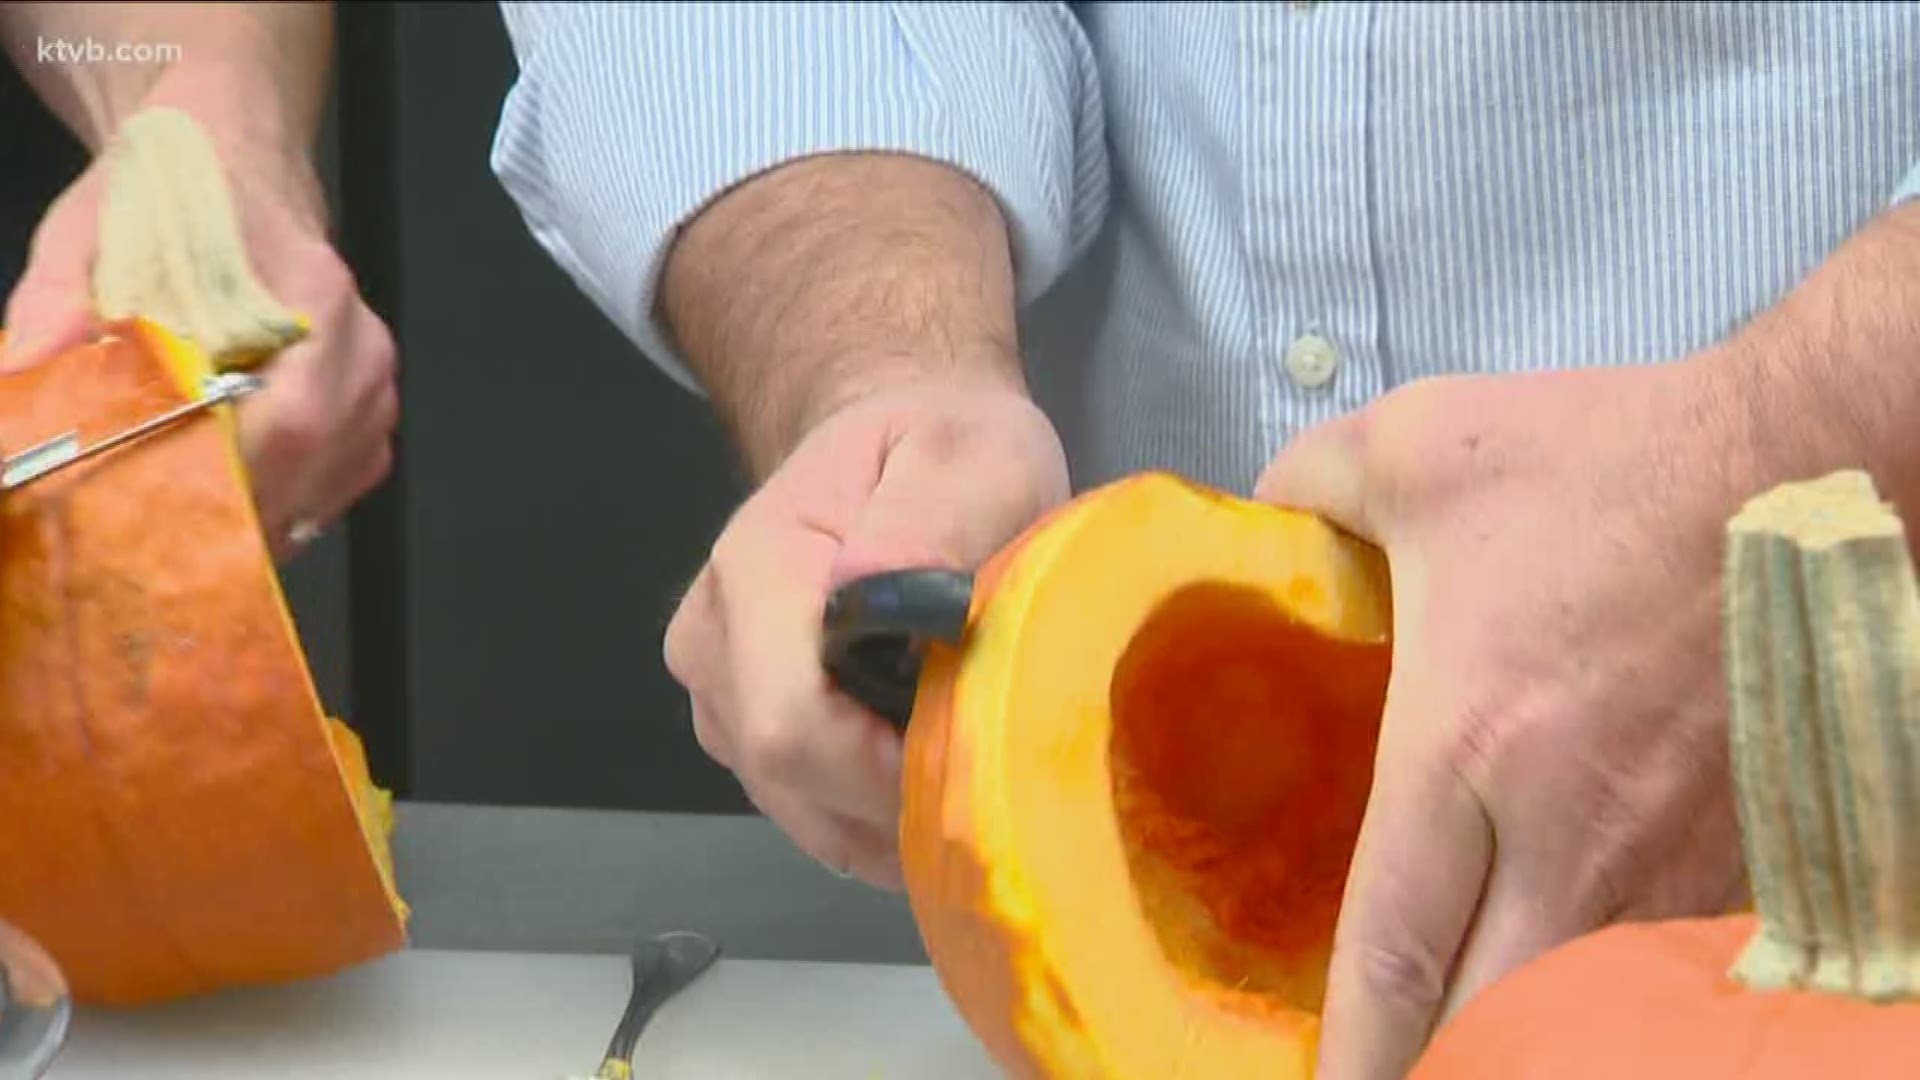 Garden master Jim Duthie takes us to the Boise Urban Garden School where he learns how to make pumpkin coconut curry soup.